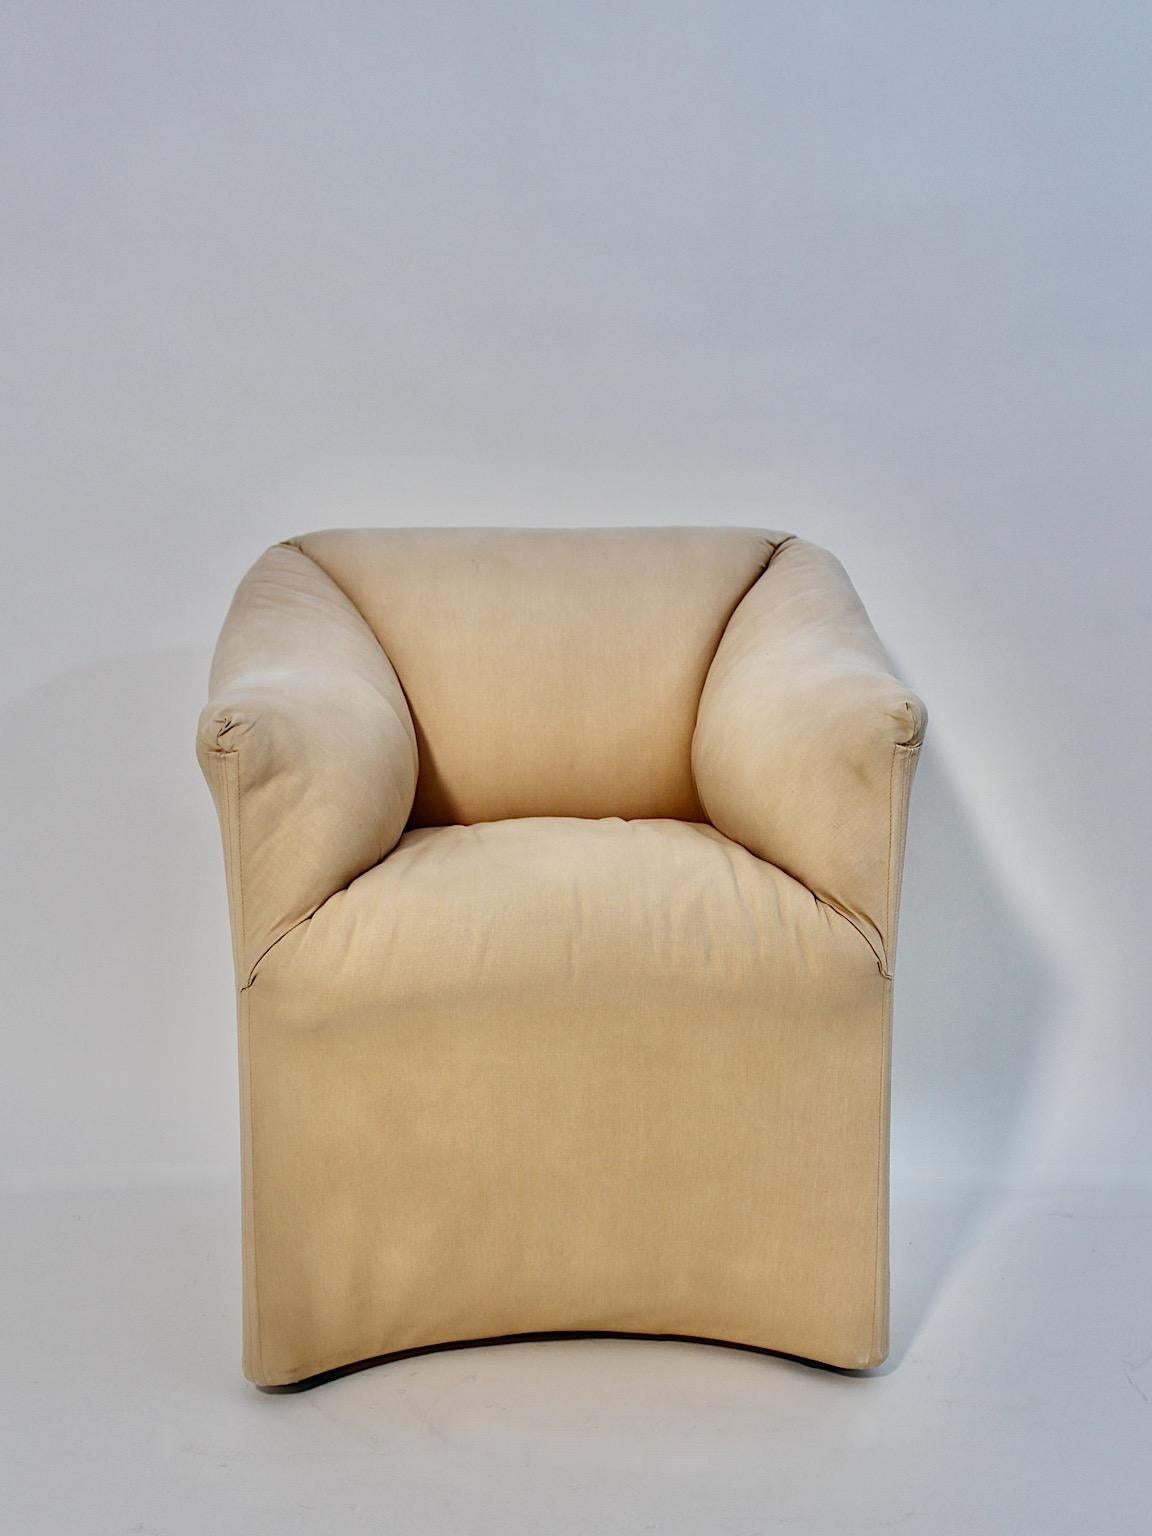 Upholstery Mario Bellini Vintage Four Cream Dining Chair Armchair Tentazione Cassina 1970s For Sale